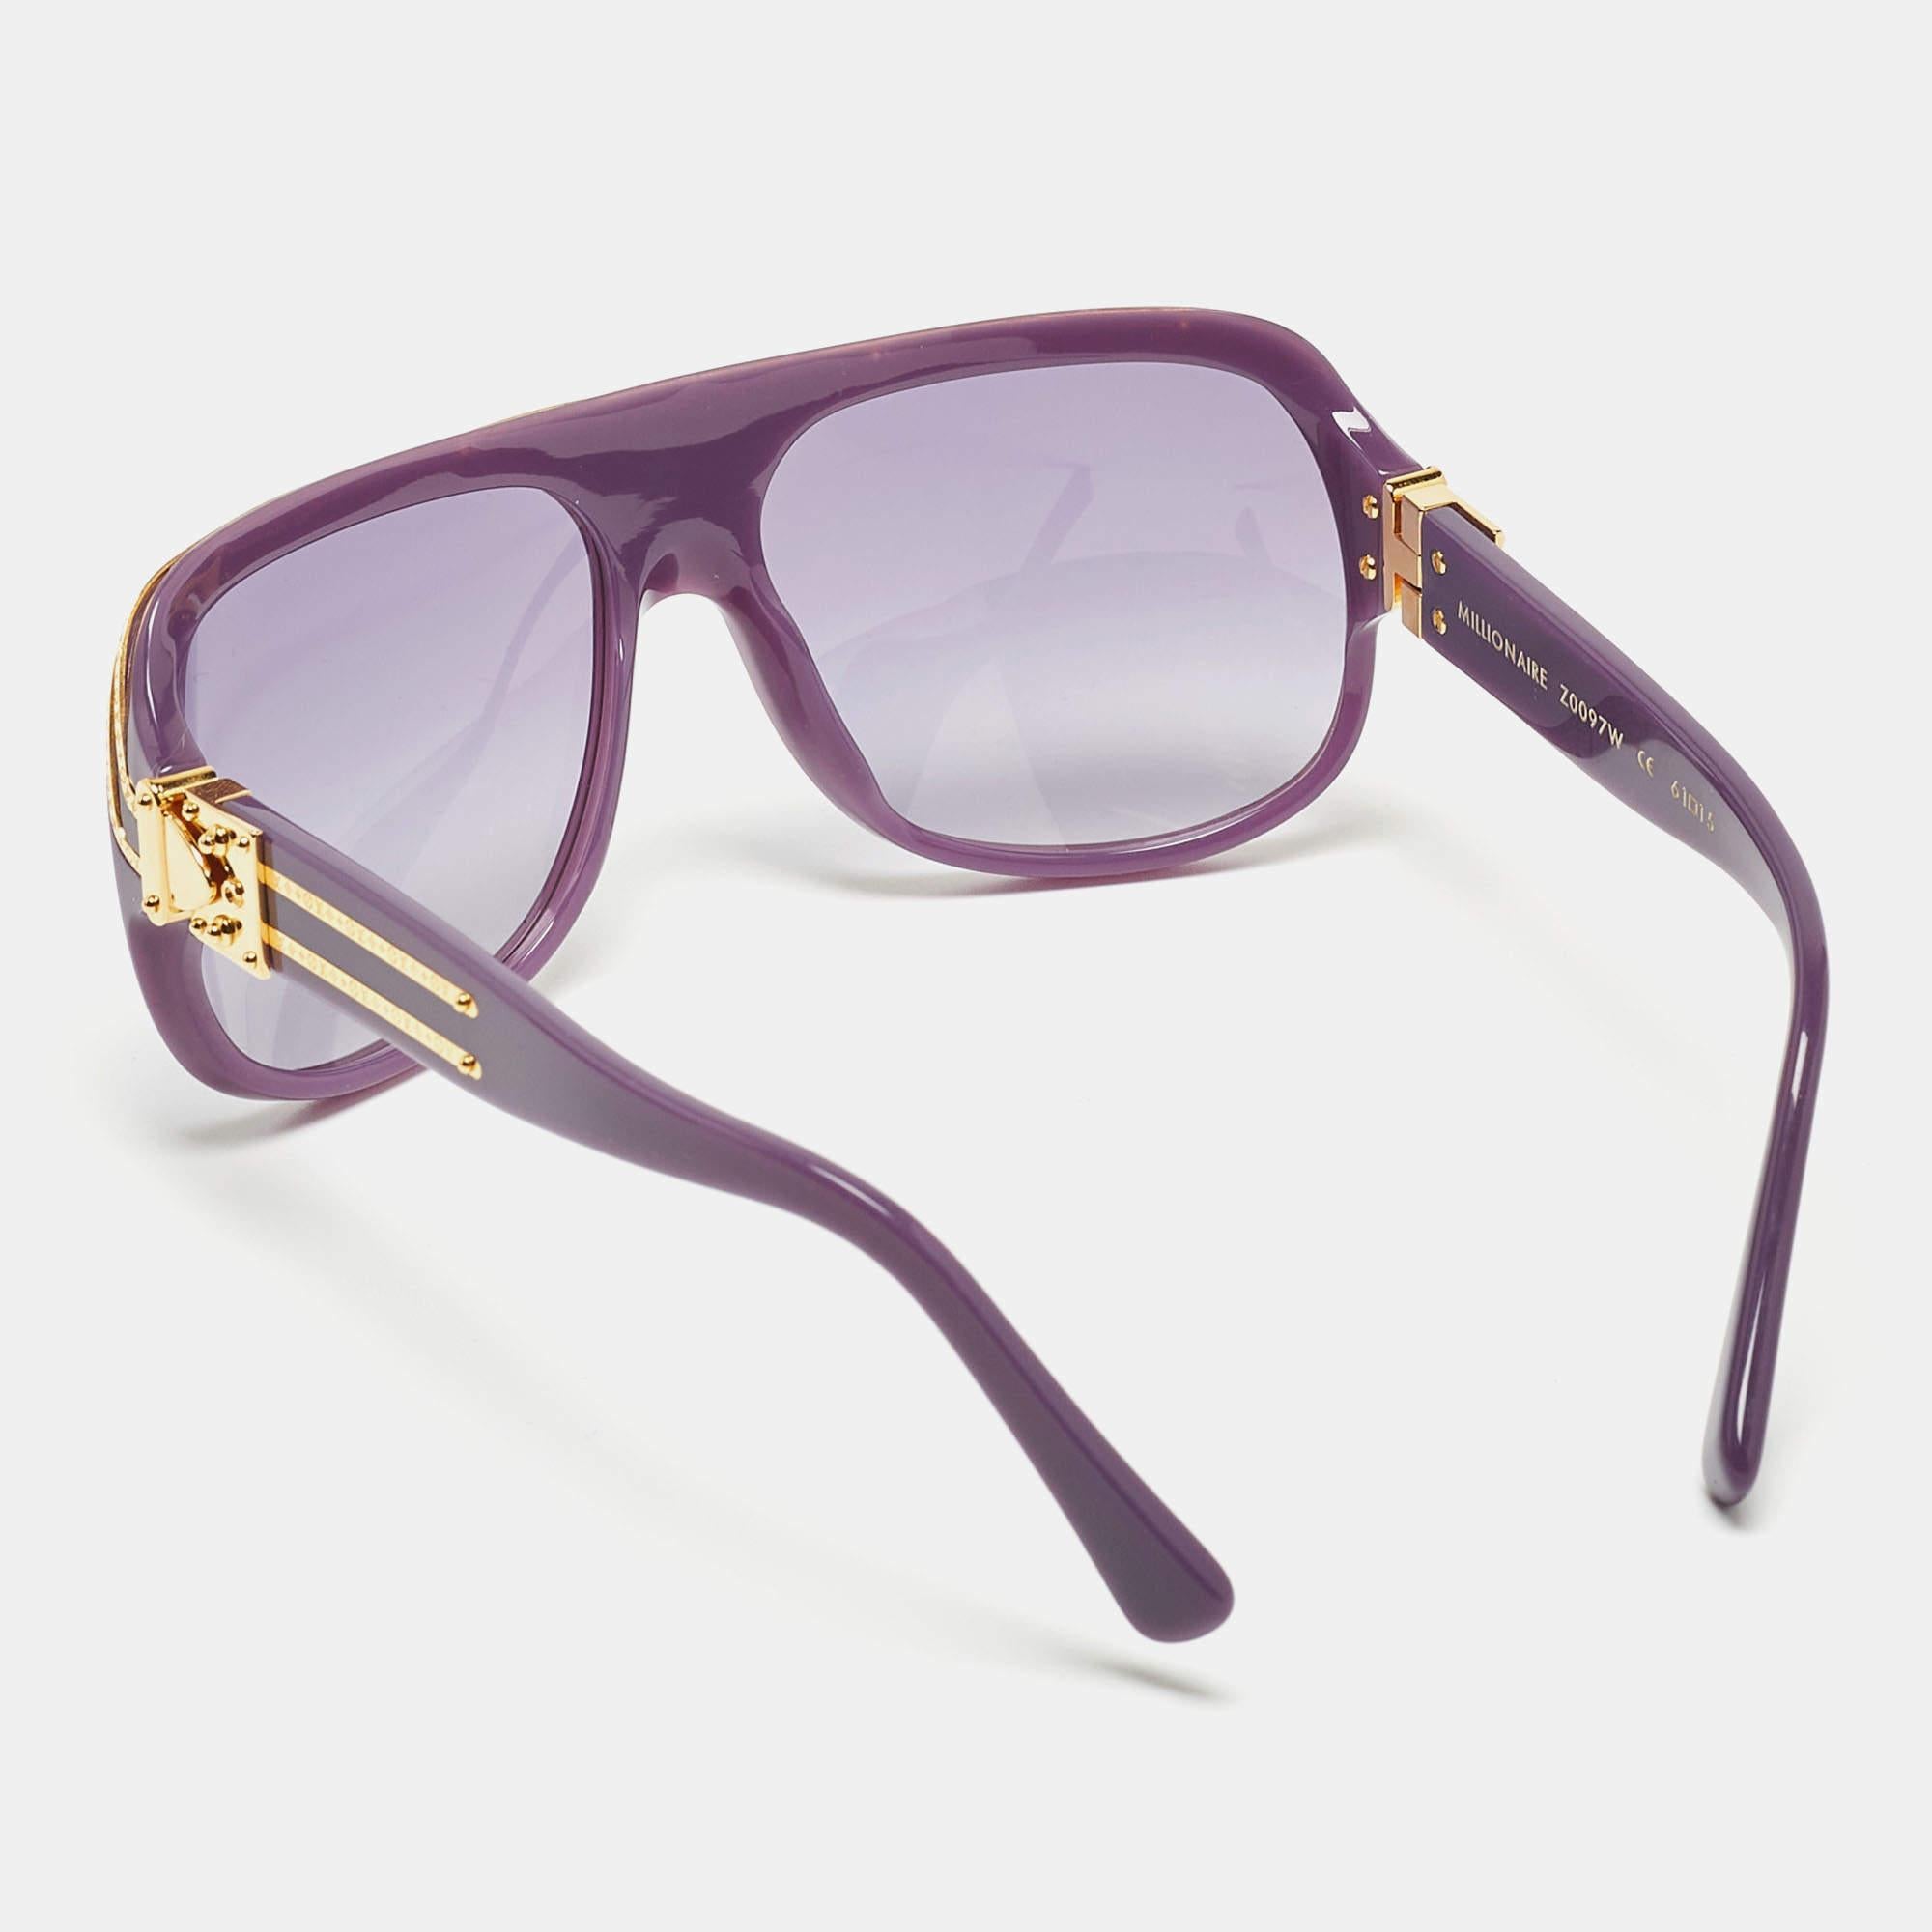 Enjoy those sunny days in full style while keeping your eyes safe with these Louis Vuitton sunglasses. The pair has a square frame fitted with high-quality lenses and brand details.

